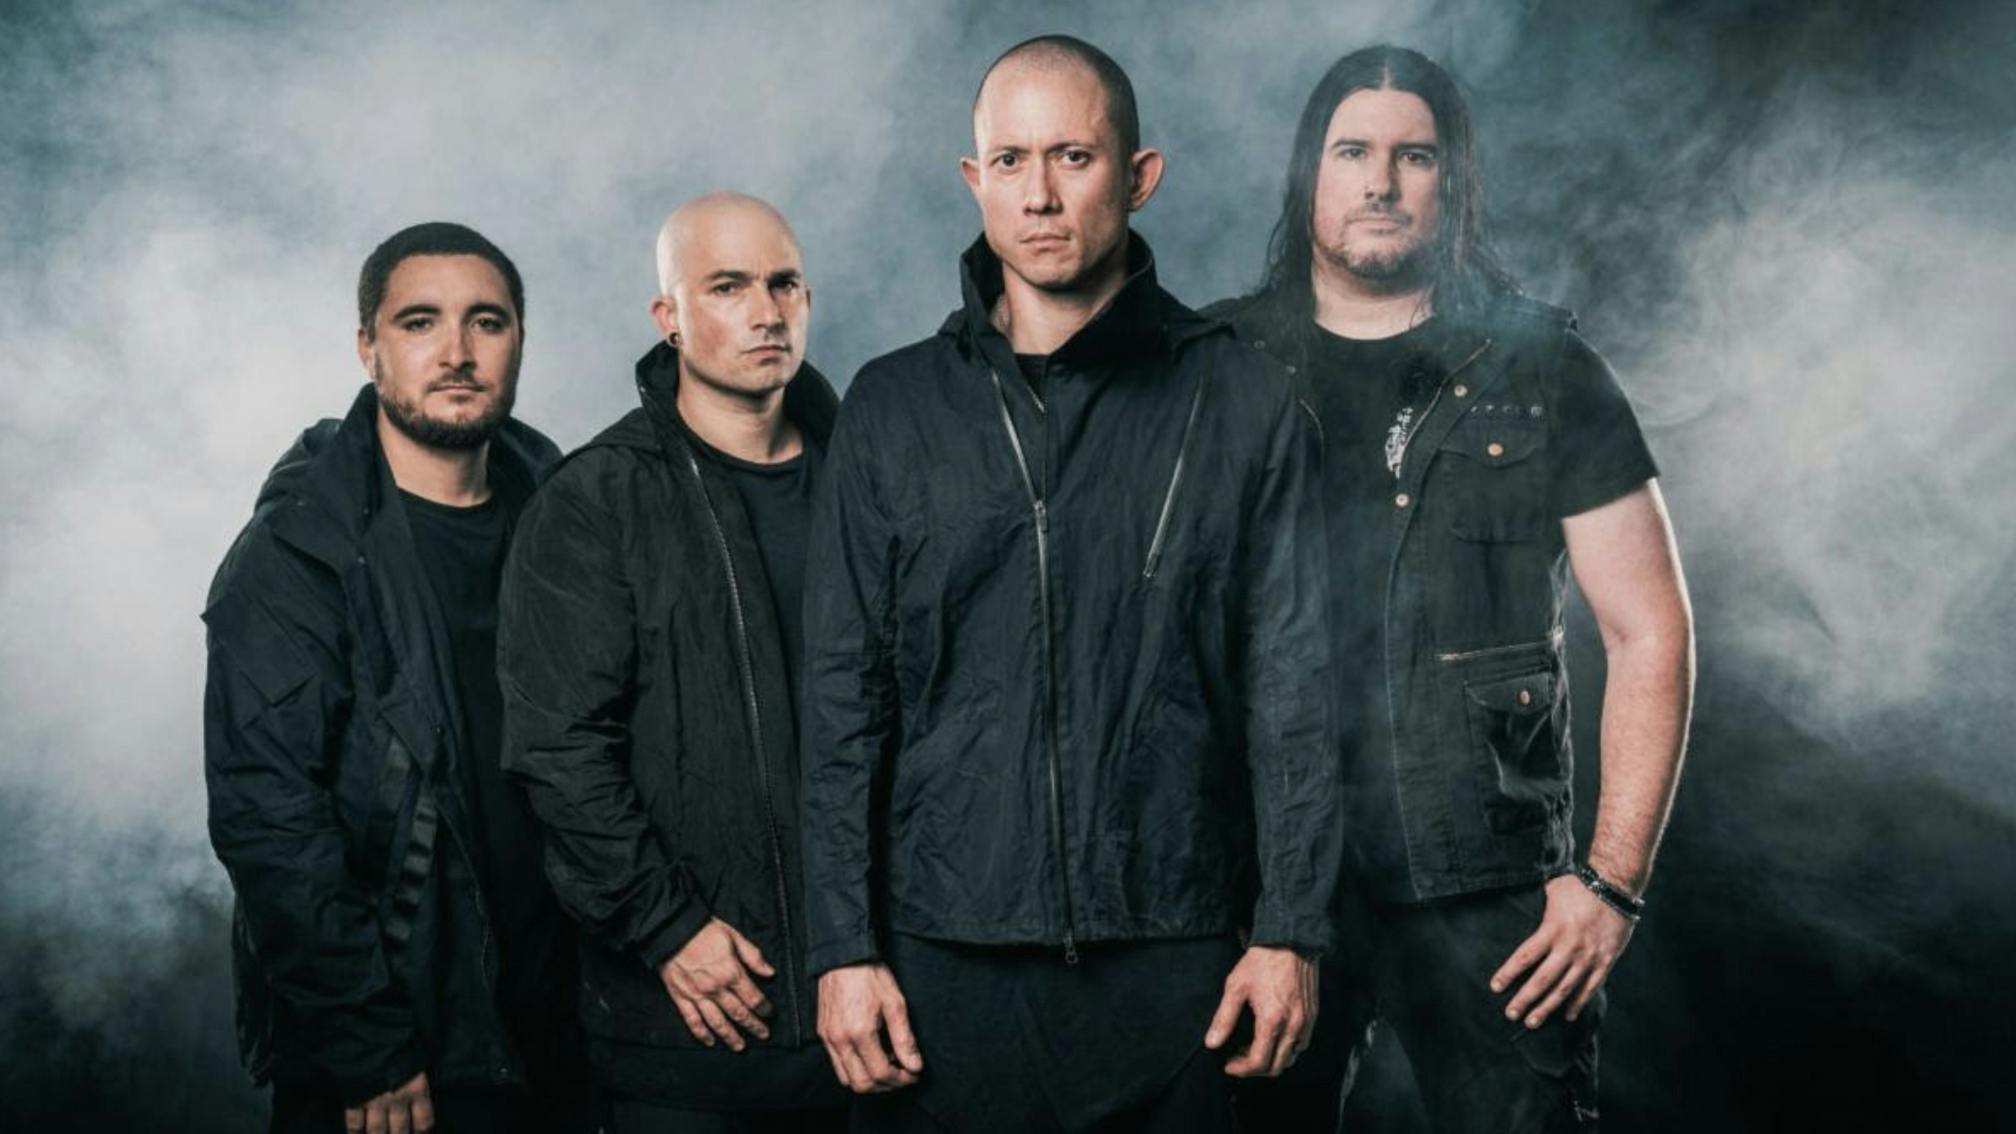 Here’s Trivium’s monstrous setlist from the first night of their UK tour